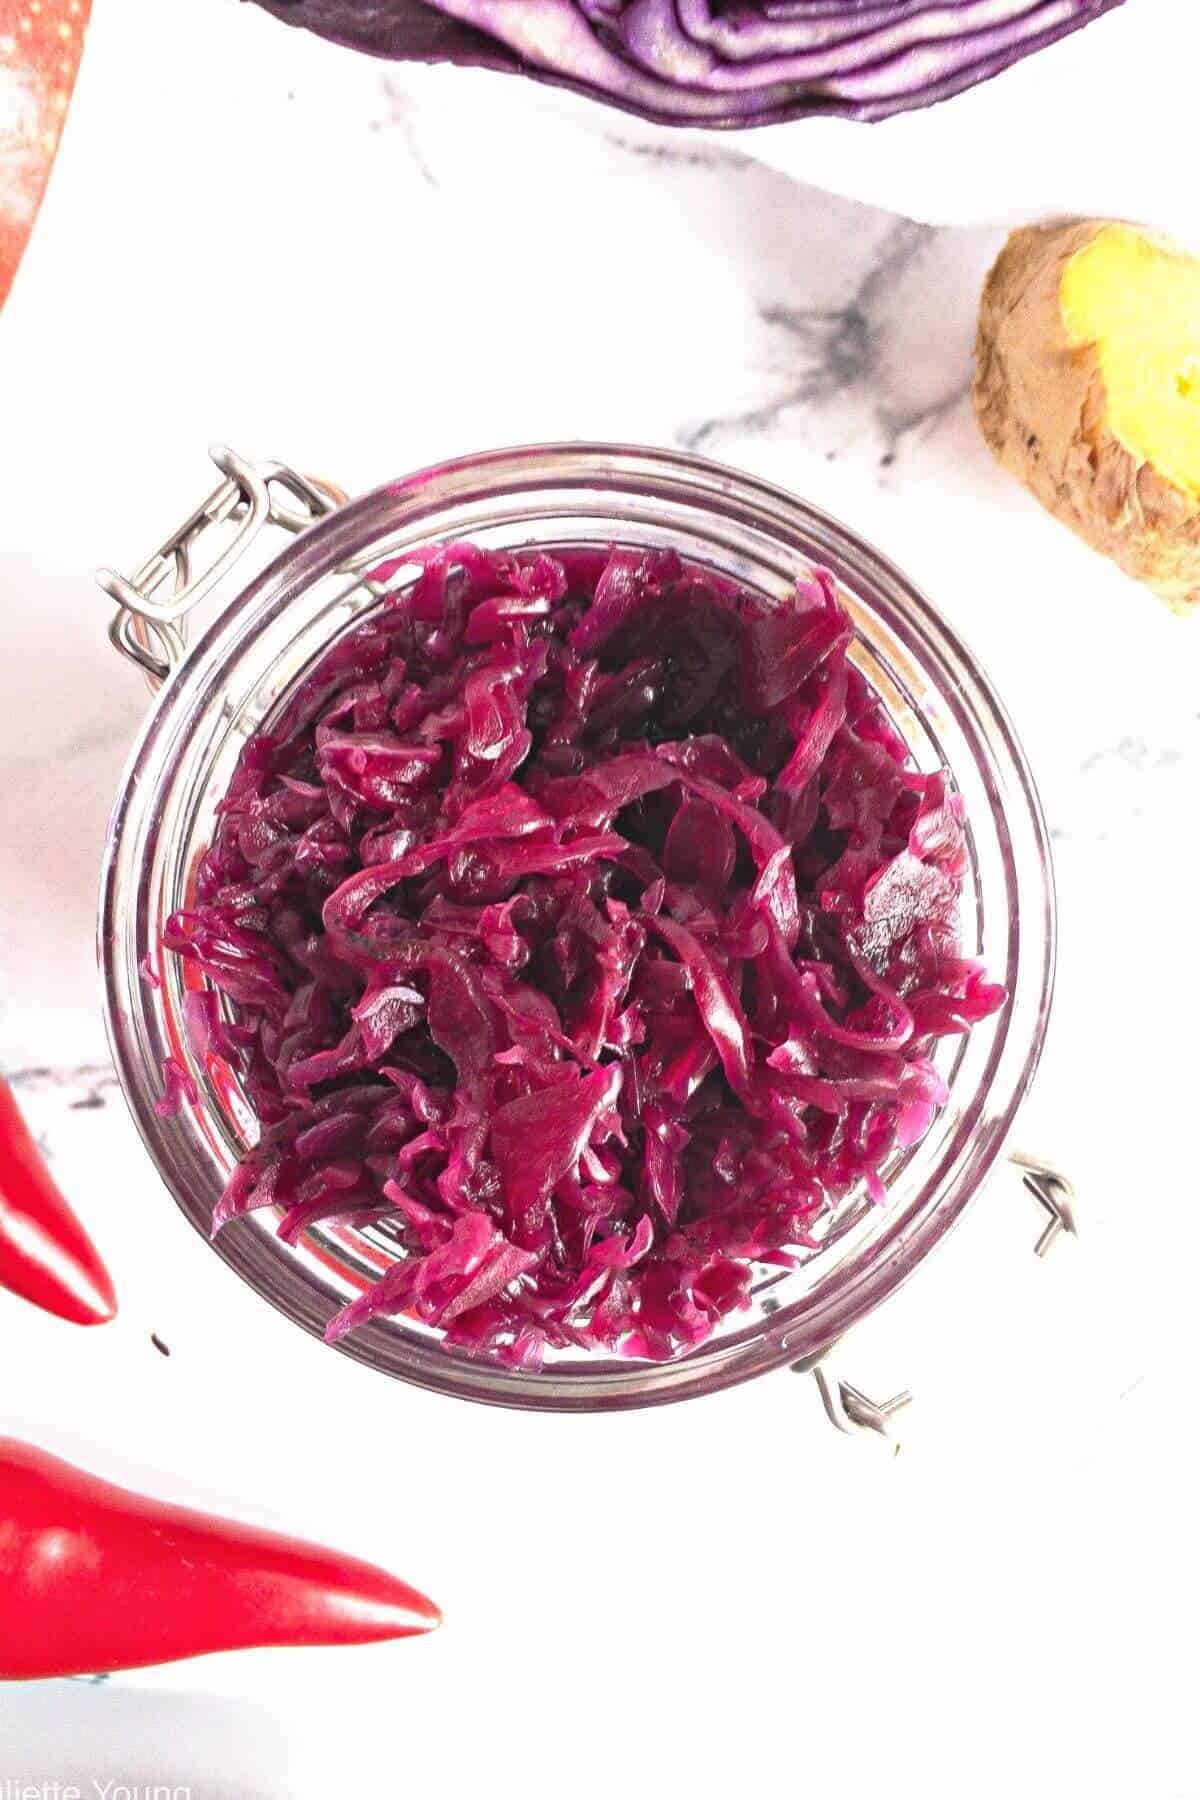 Top down view of a jar of red cabbage sauerkraut and red chillies.